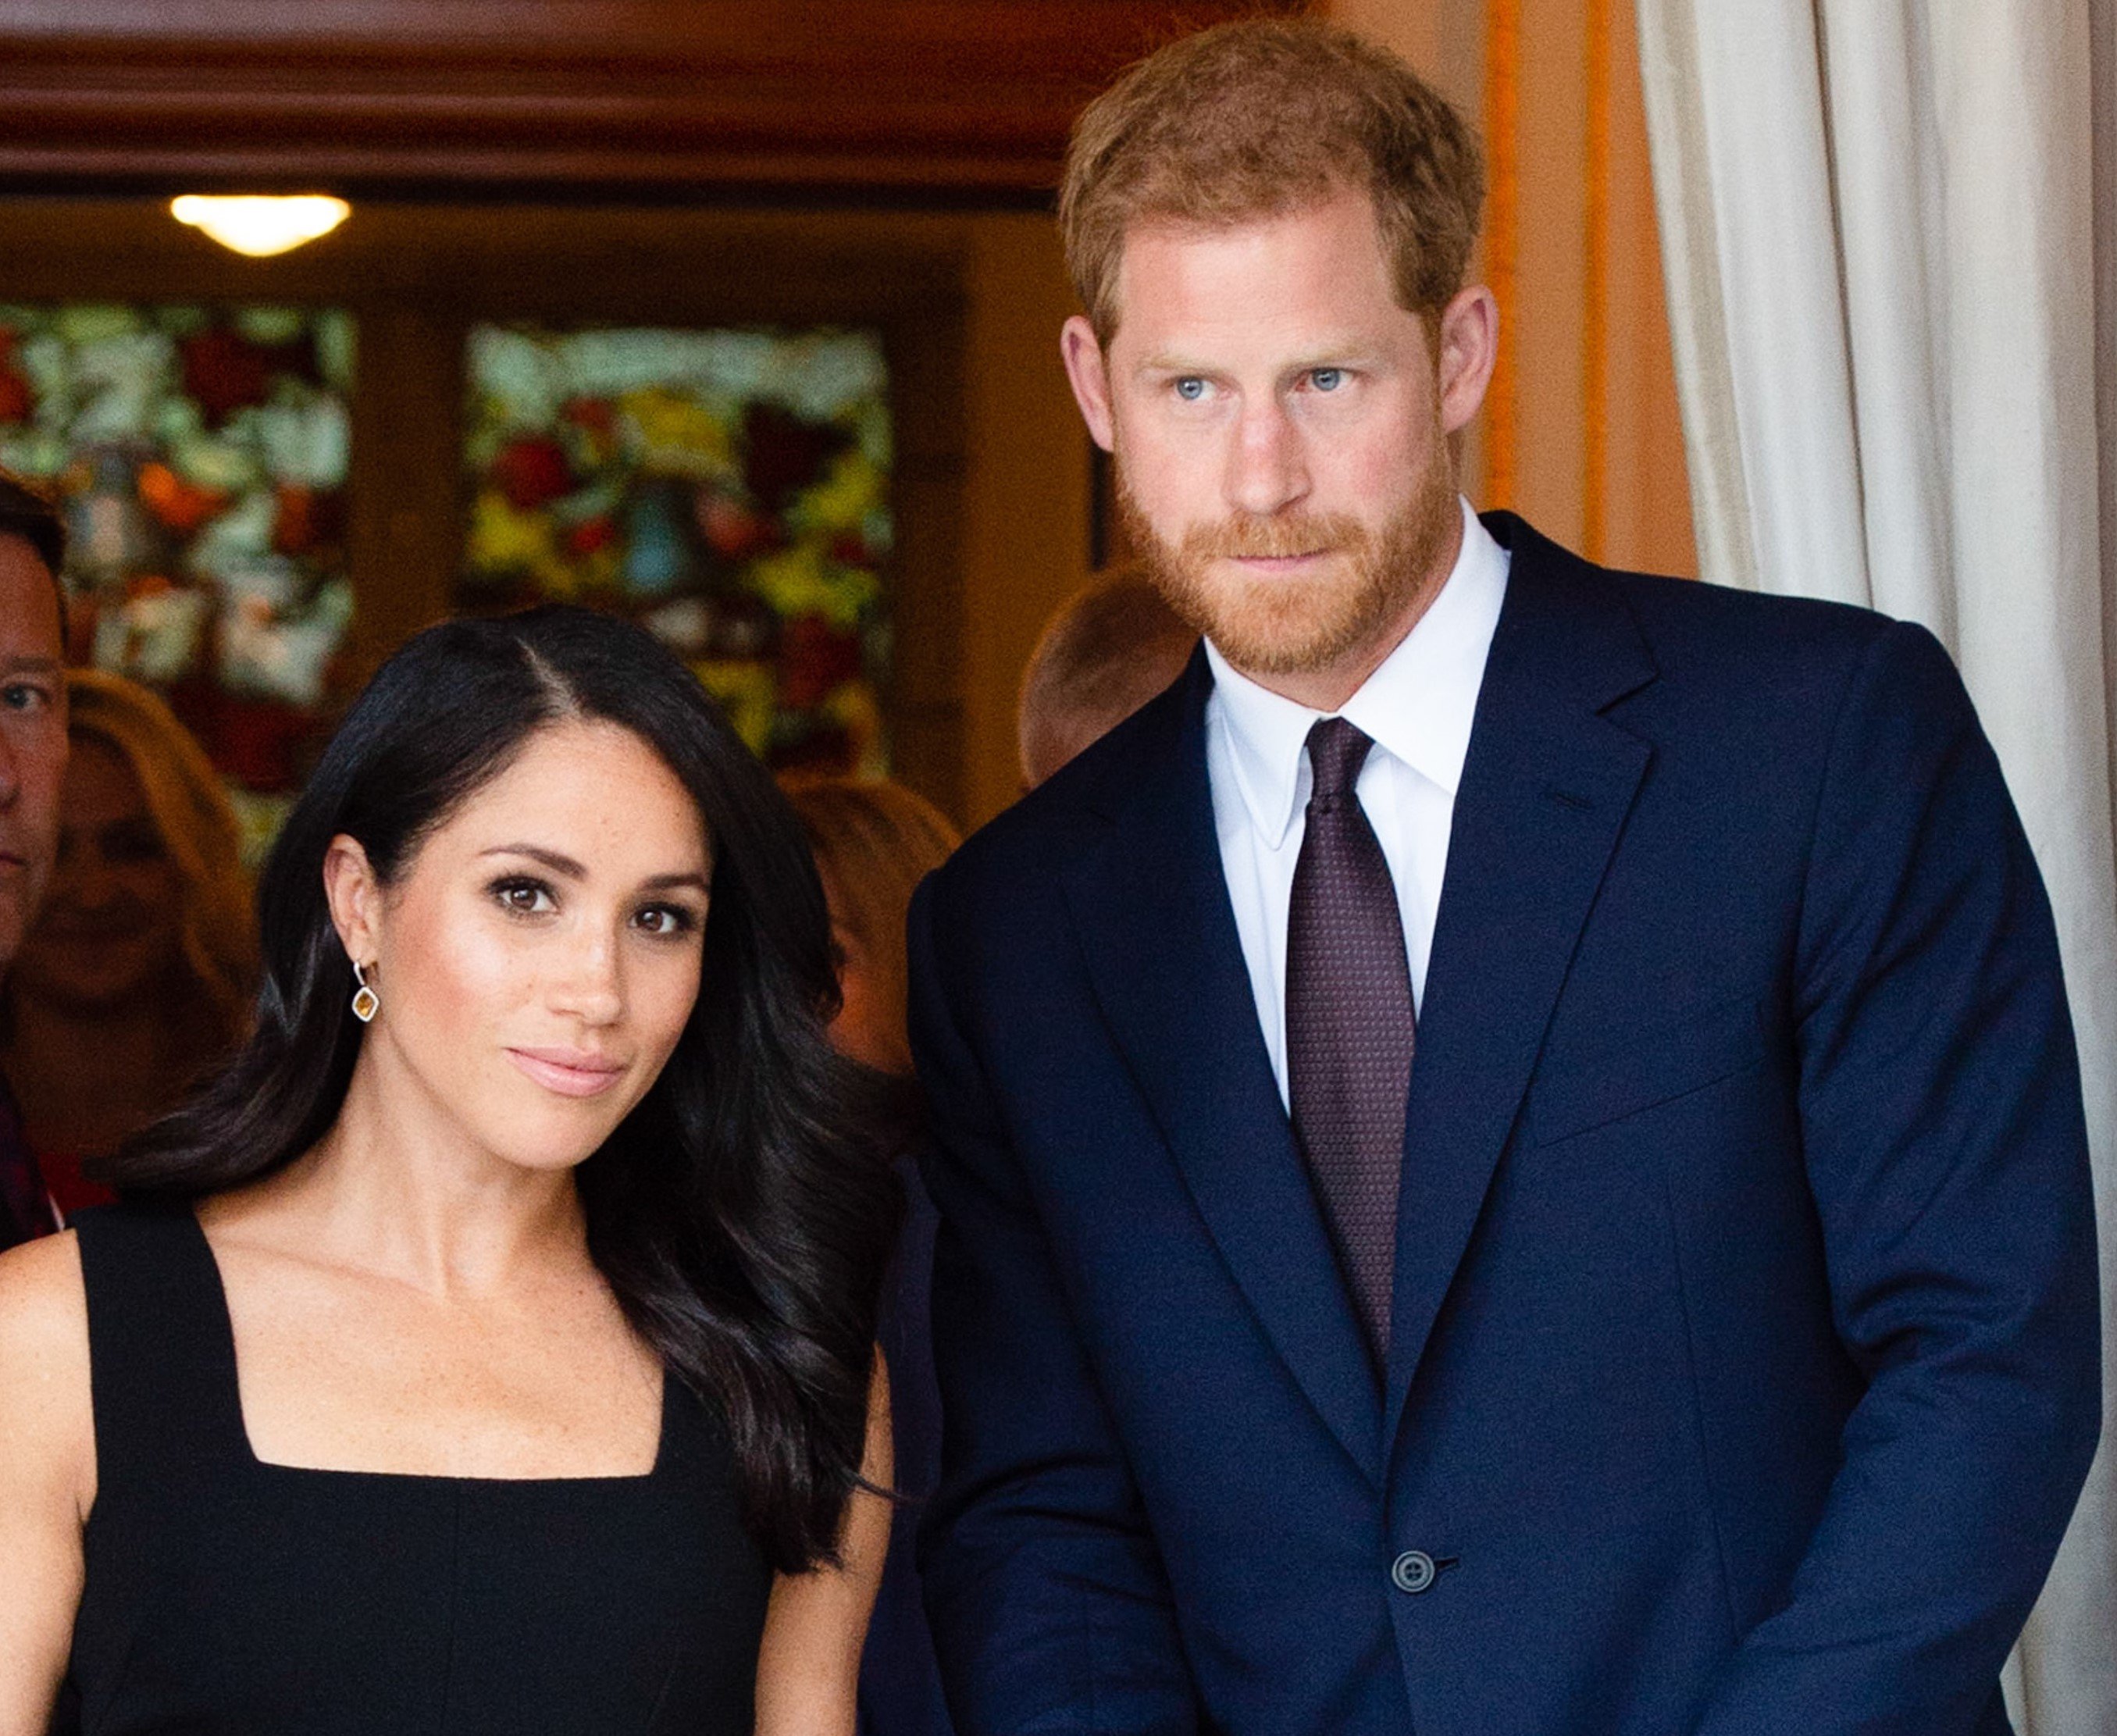 Prince Harry and Meghan Markle attending a party at the British Ambassador's residence in Ireland